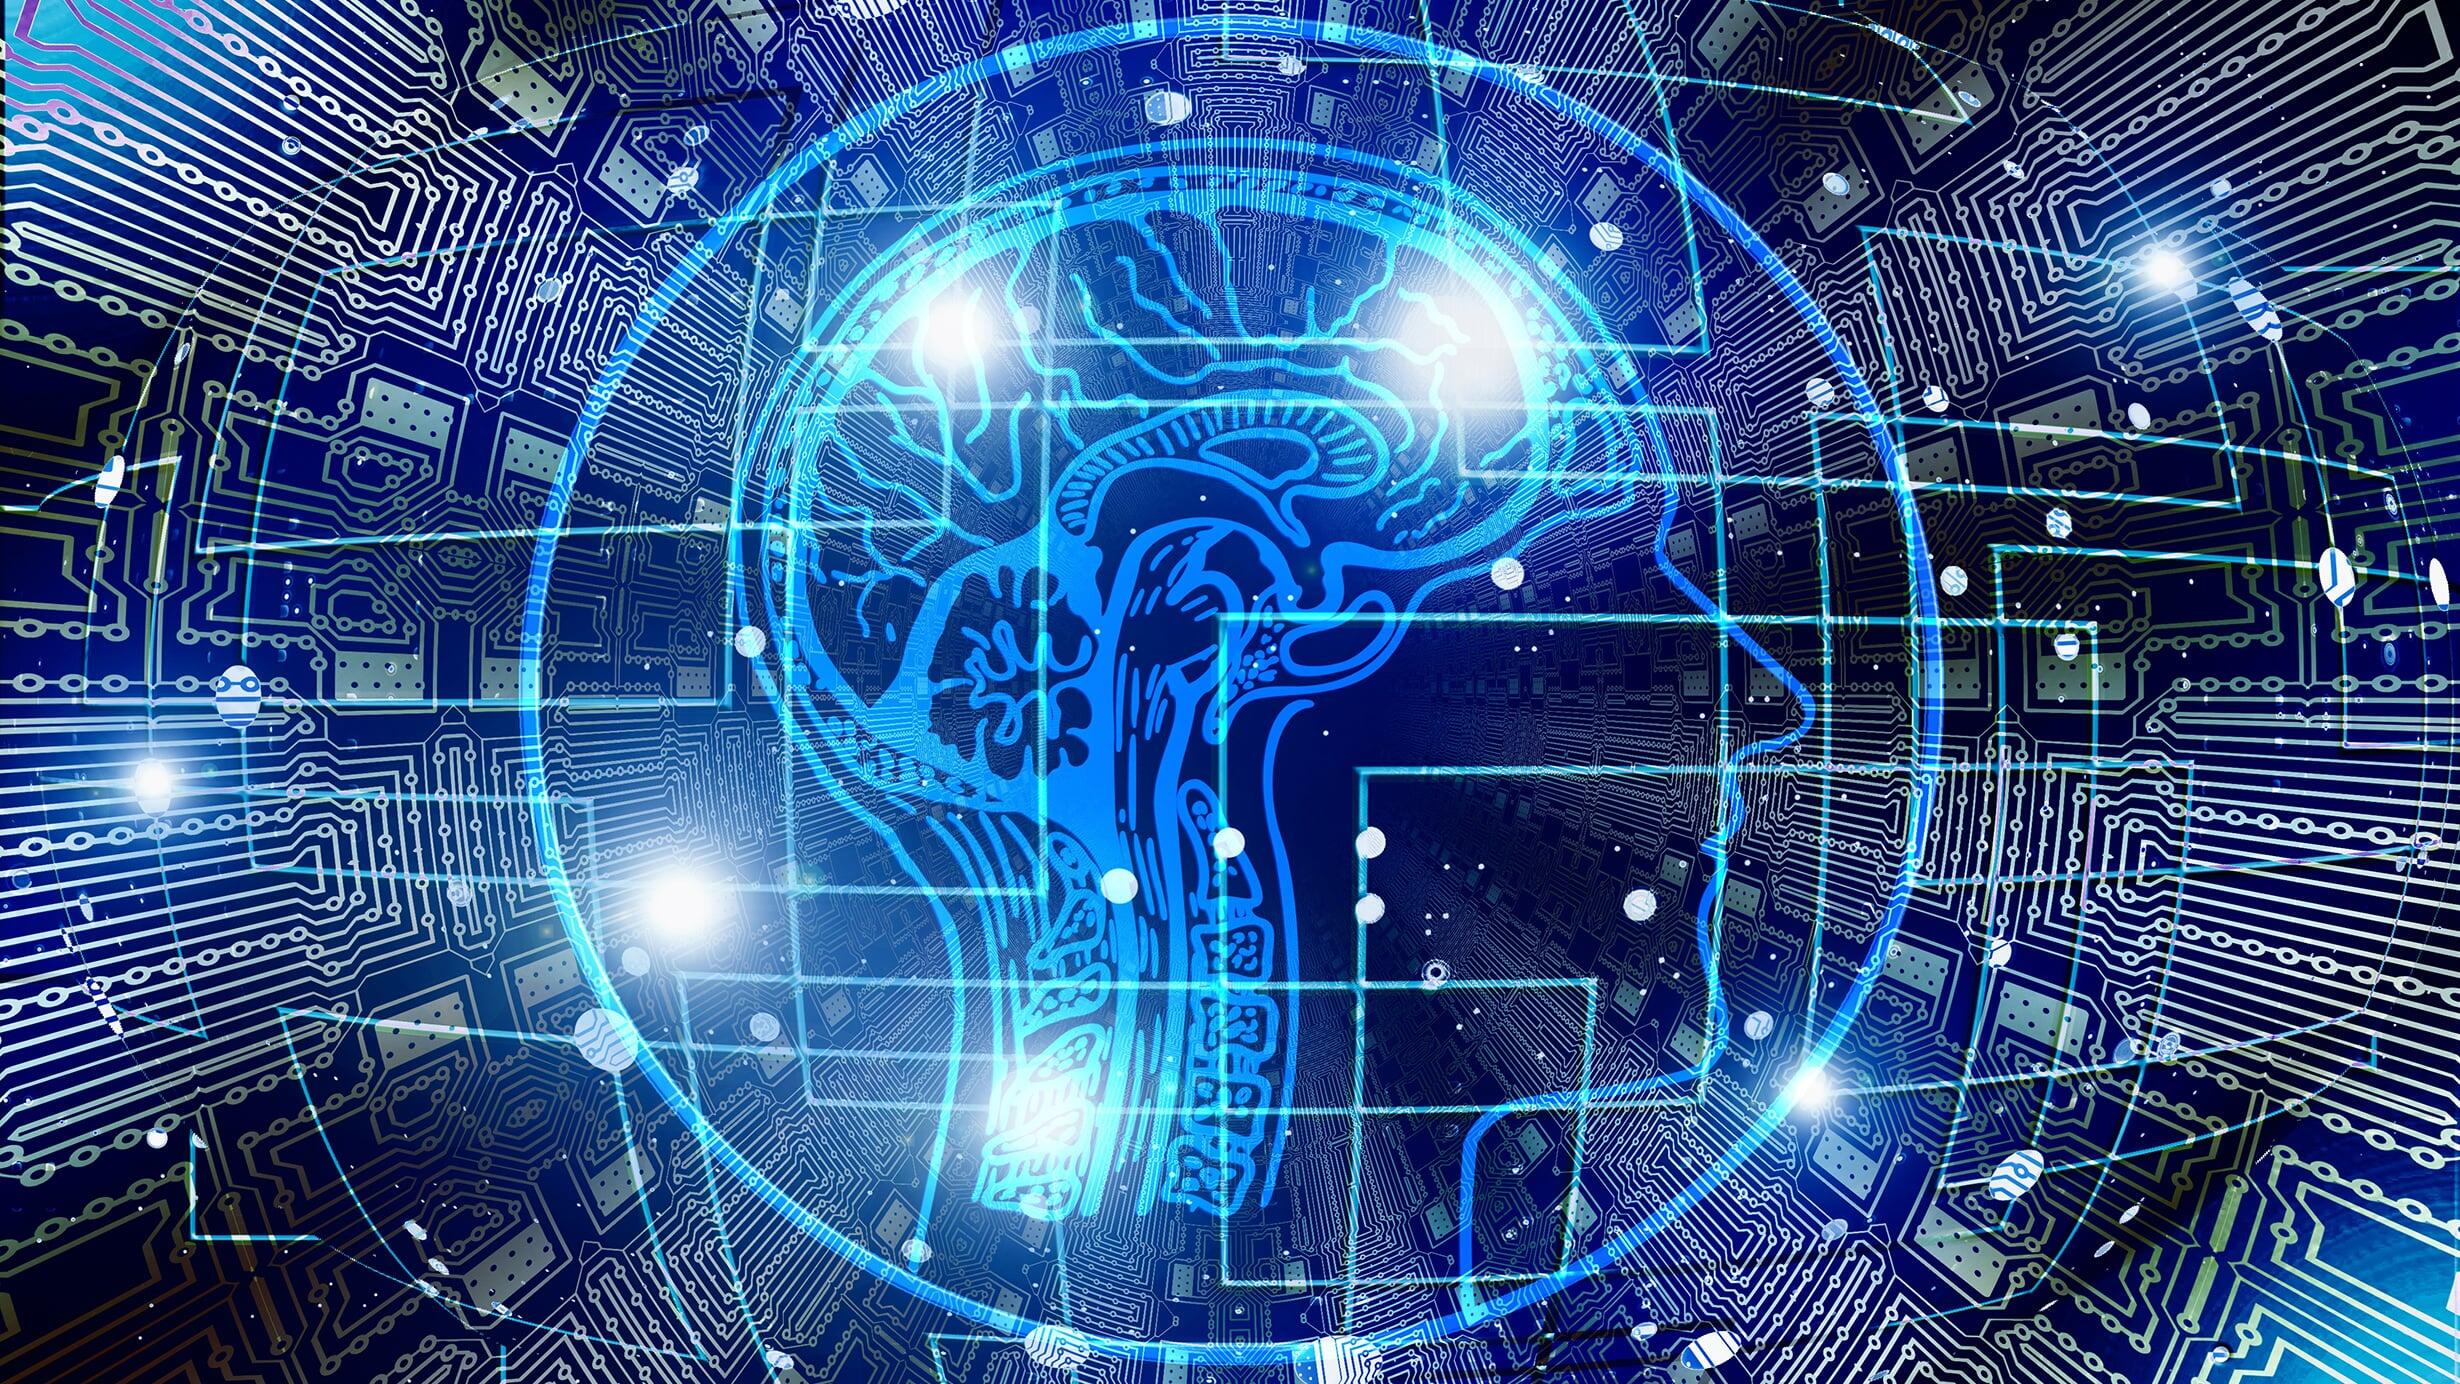 An artist's rendition of a human brain in profile, against a backdrop of digital circuitry, suggesting the union of computer and human intelligence.